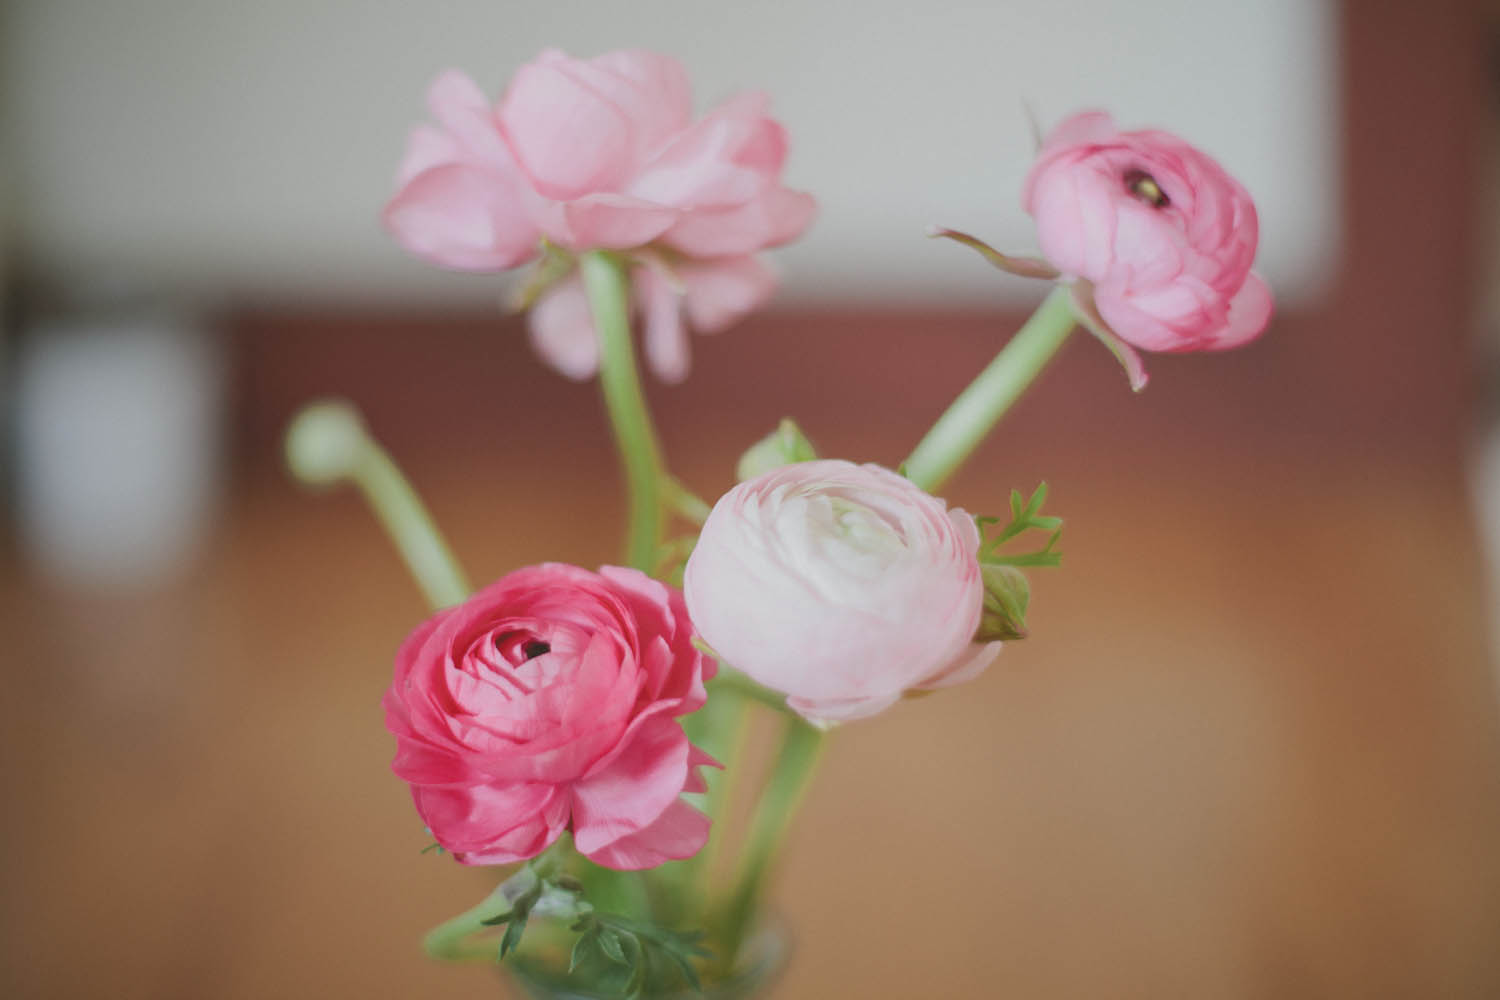 two pretty pink roses are in a small vase